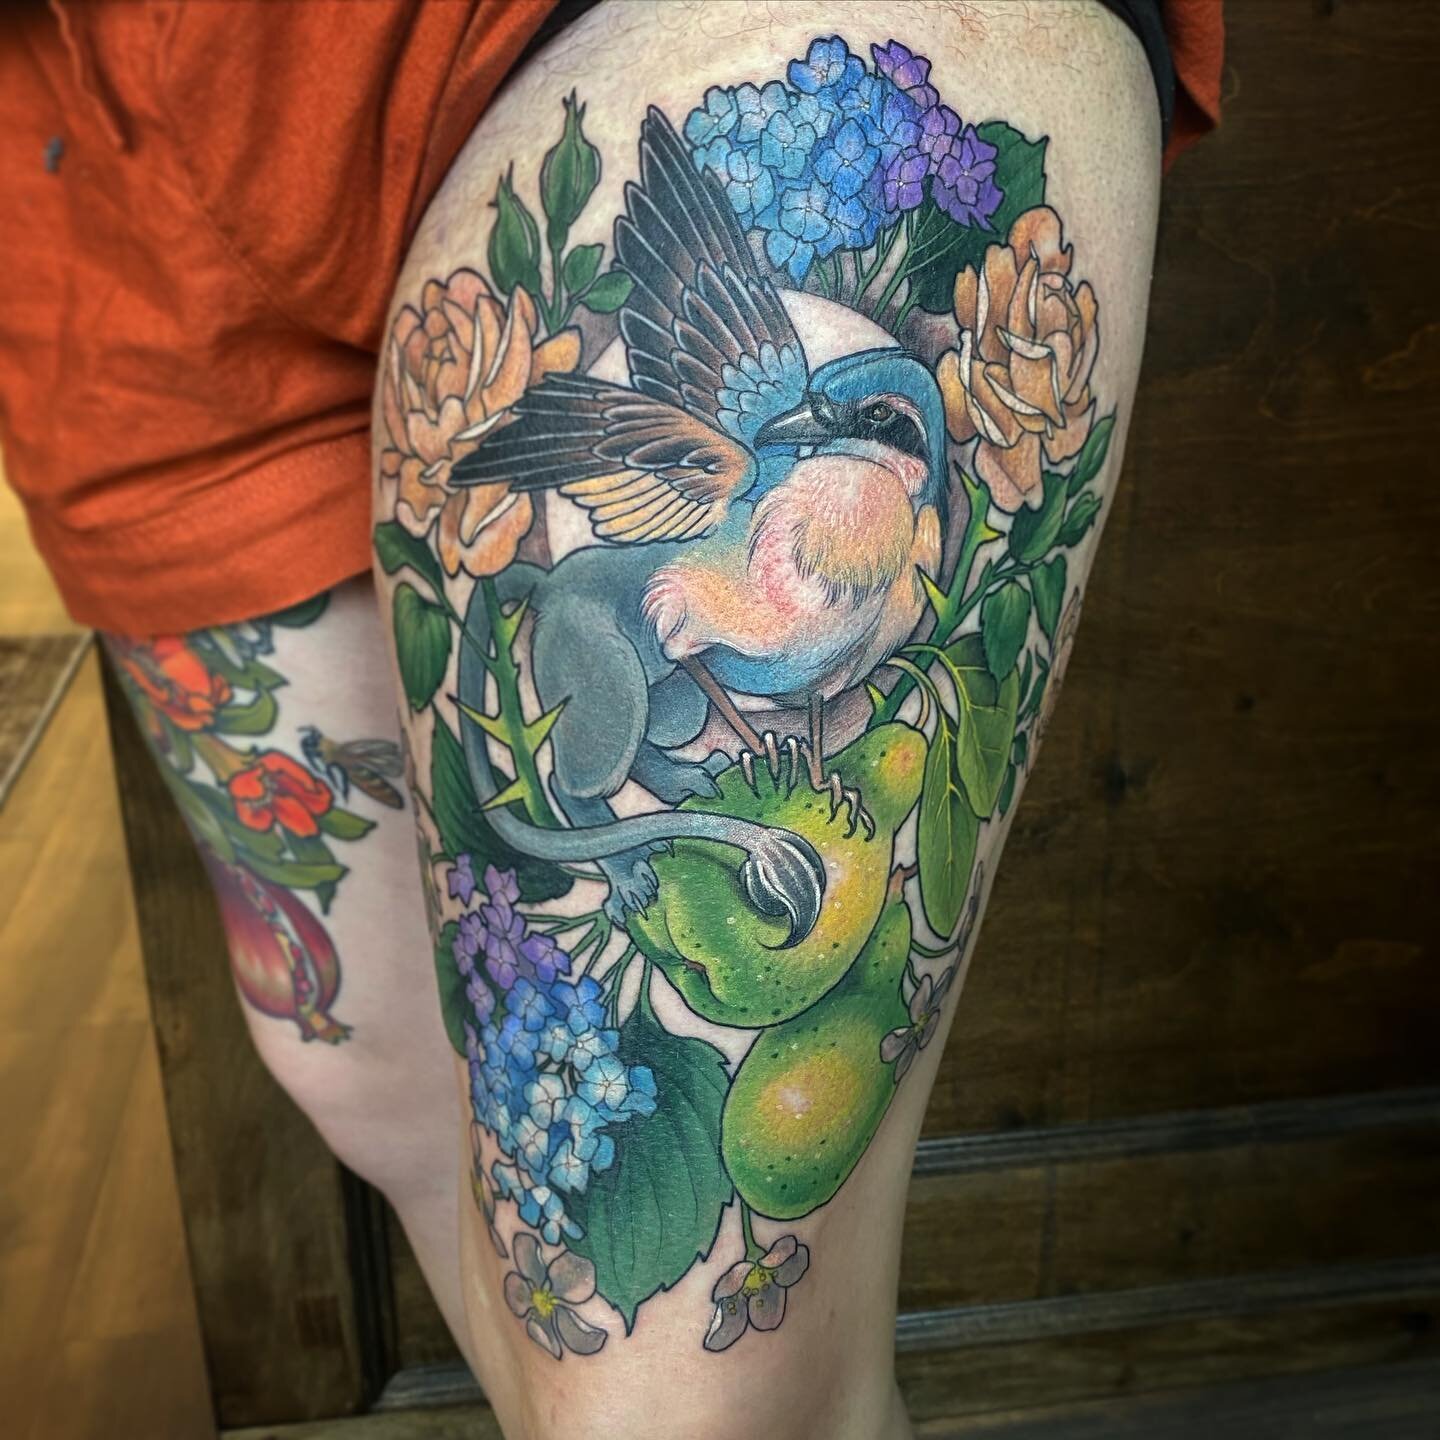 Just a casual lil one shot for Beala, the toughest gal in town. Scroll to see the companion piece on the other leg, and the side angles. Thanks so much Beala! 🍐
*
#tattoo #gryphon #gryphontattoo #fruittattoo #botanicaltattoo #botanicalillustration #